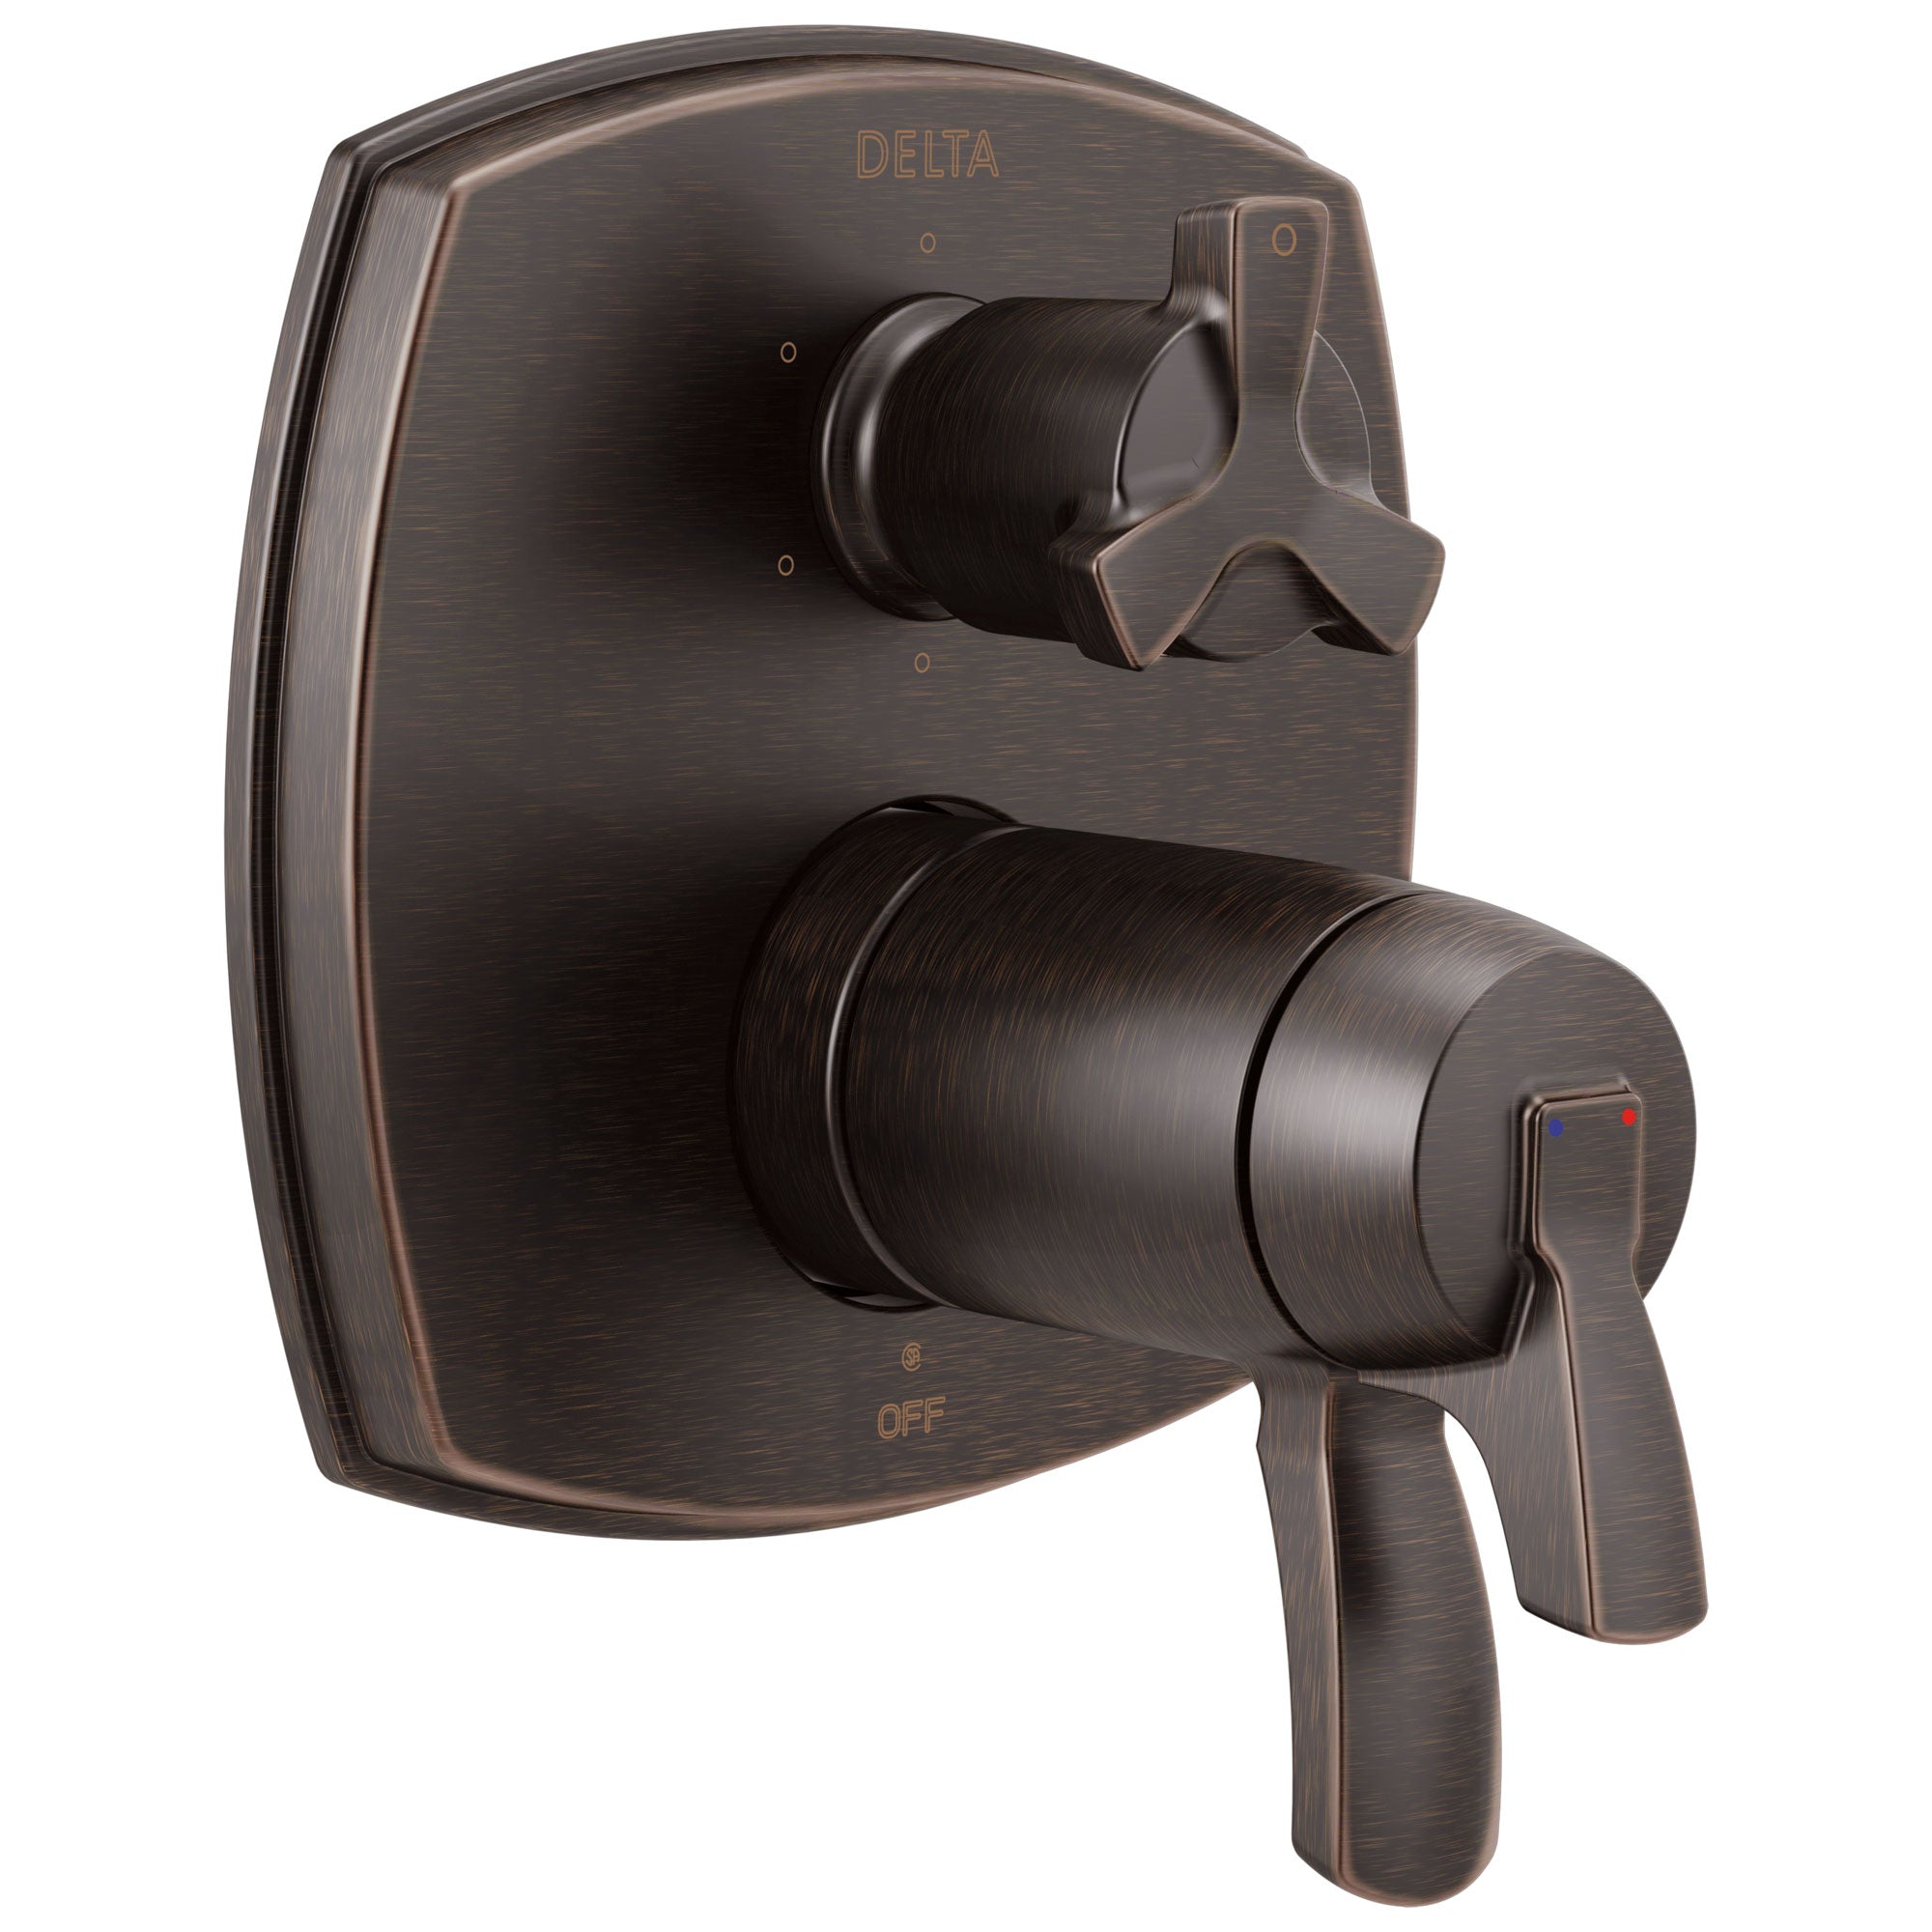 Delta Stryke Venetian Bronze Finish Thermostatic Shower System Control with 6 Setting Integrated Cross Handle Diverter Includes Valve & Handles D3076V